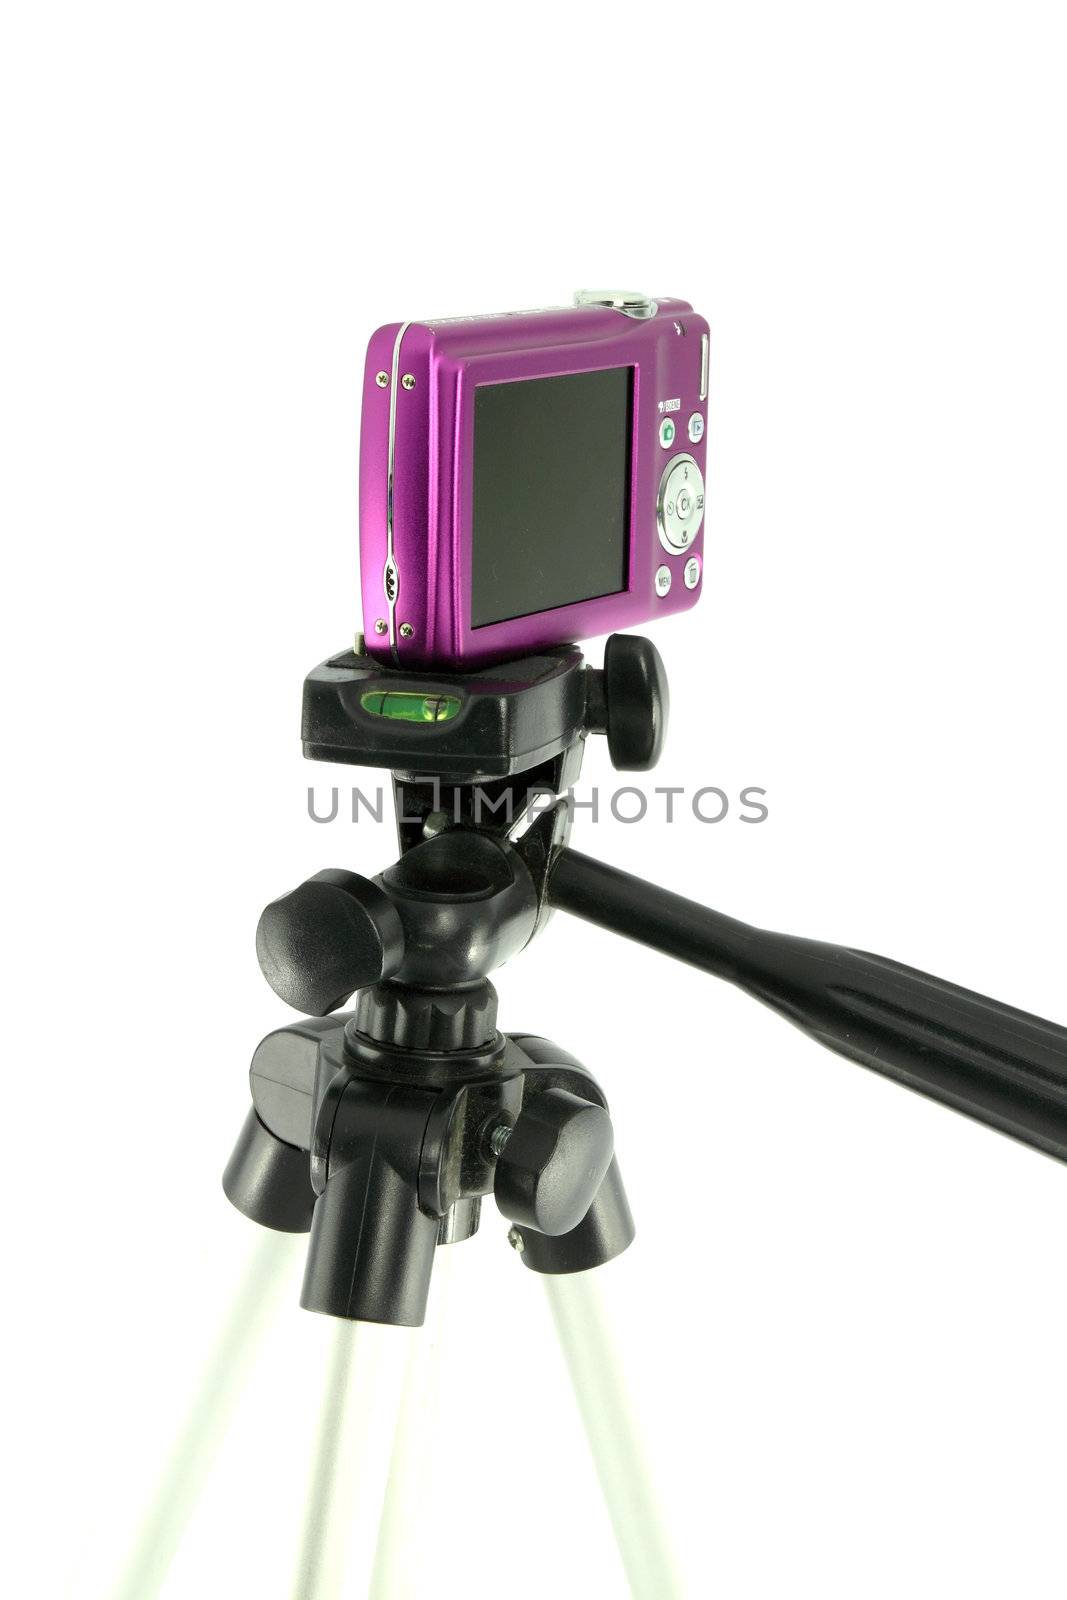 close-up pink camera on a tripod  on a white background